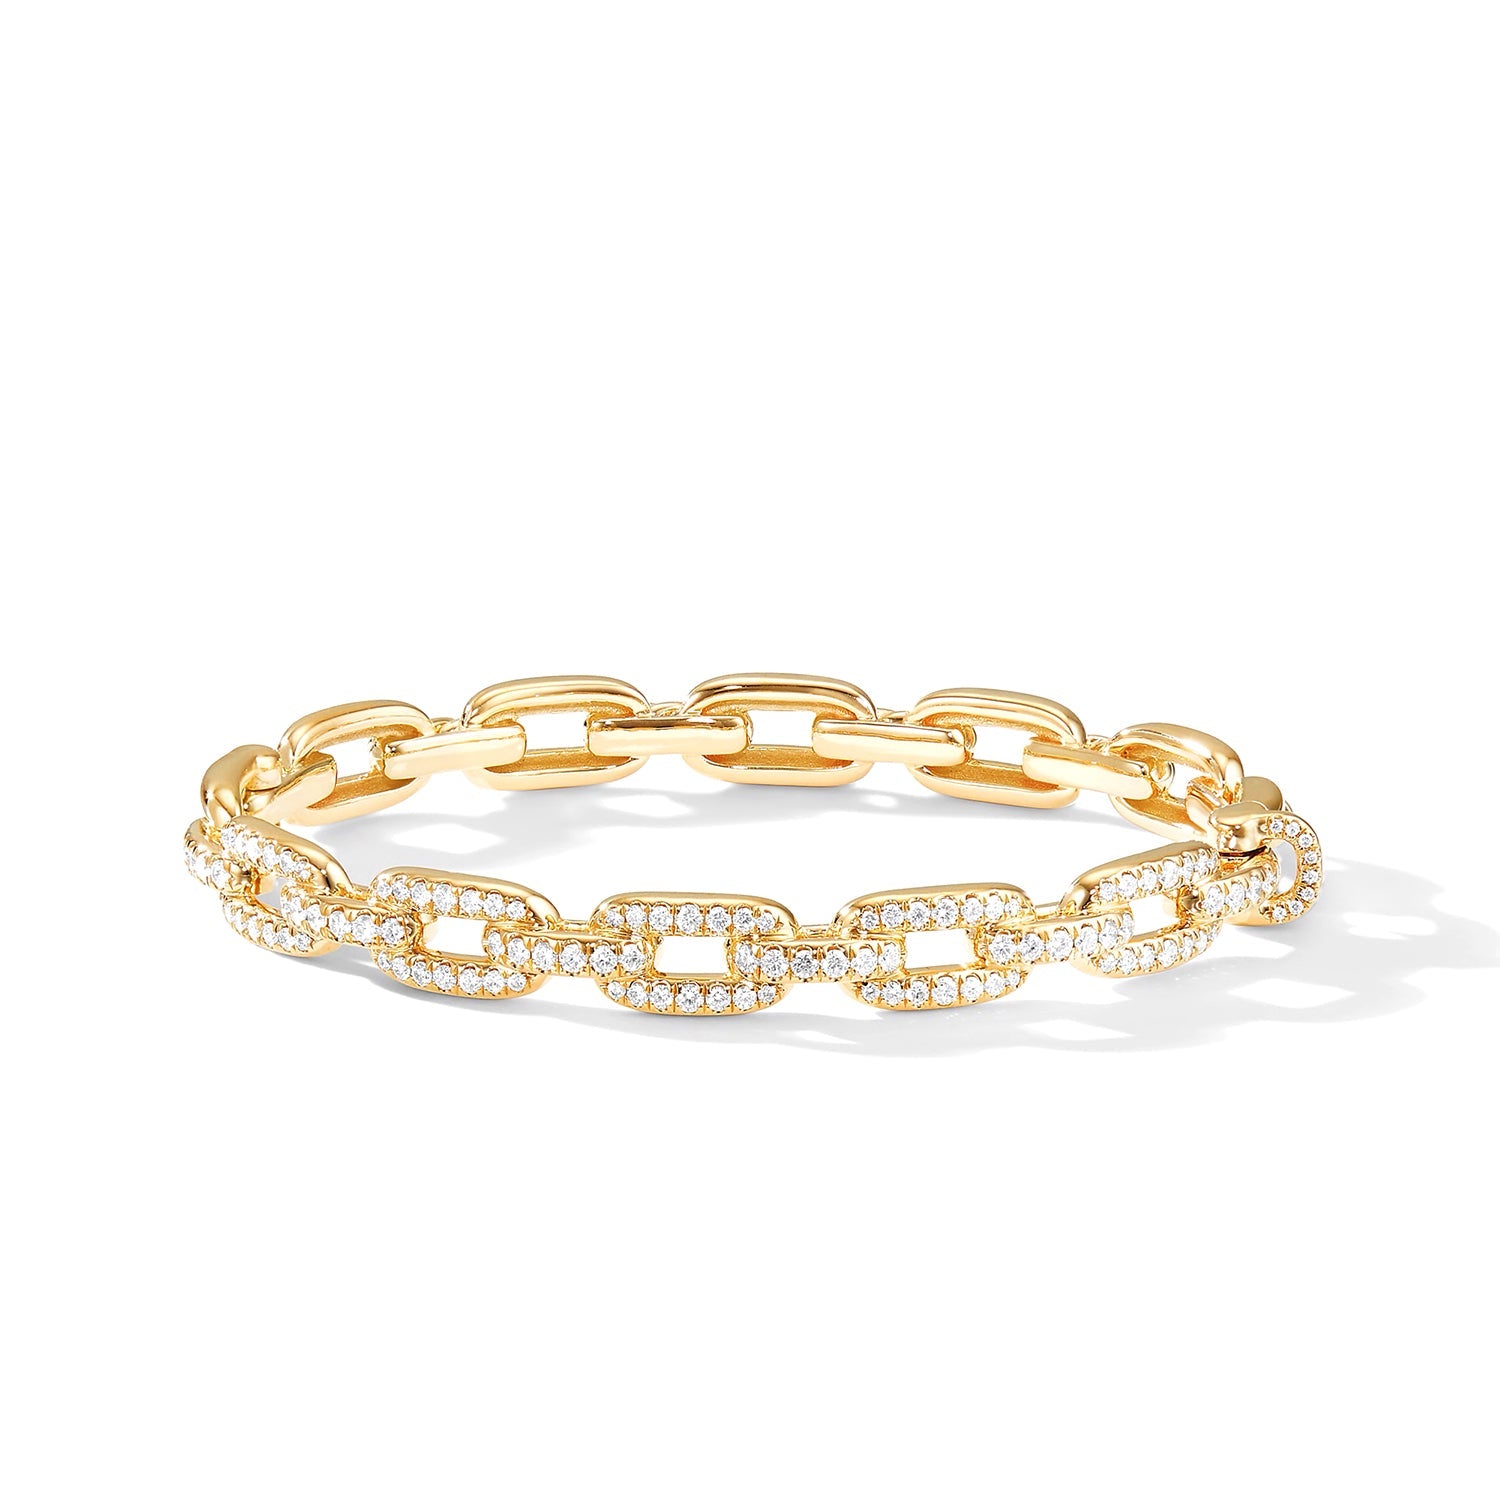 Stax Chain Link Bracelet with Diamonds in 18ct Yellow Gold - Medium